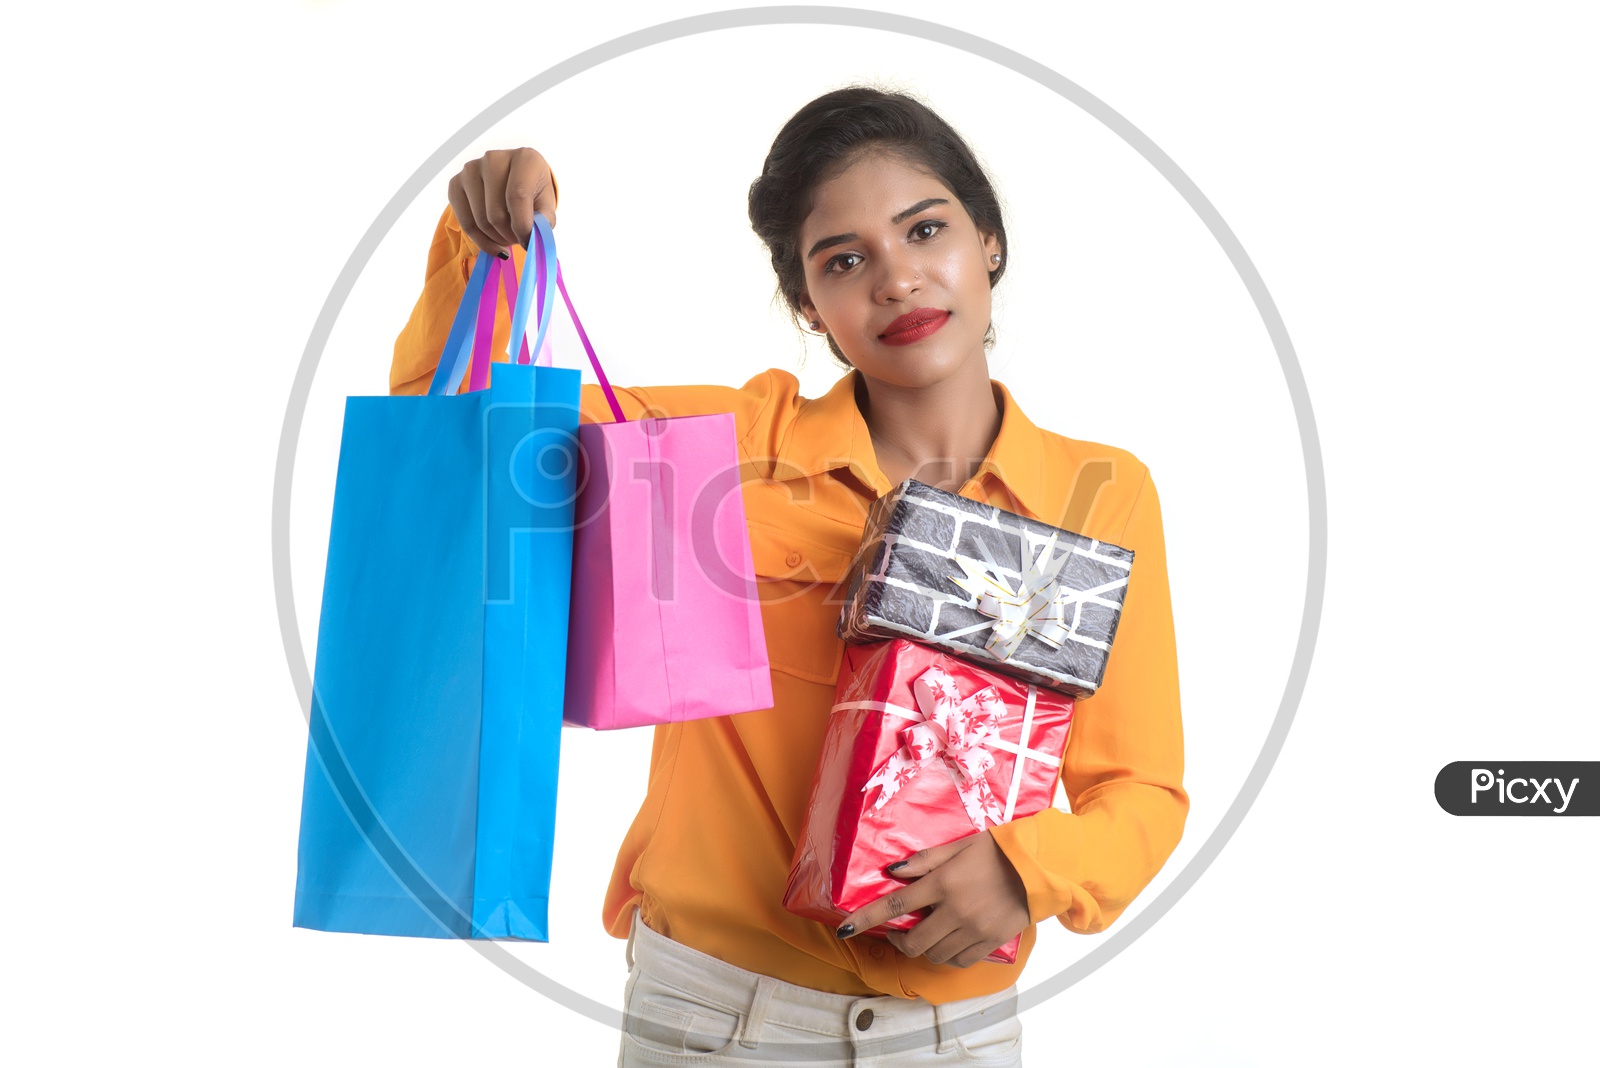 A Happy Young  Indian Girl Holding Gift Boxes and Bags in Hand And With a Smile Face on an Isolated White Background